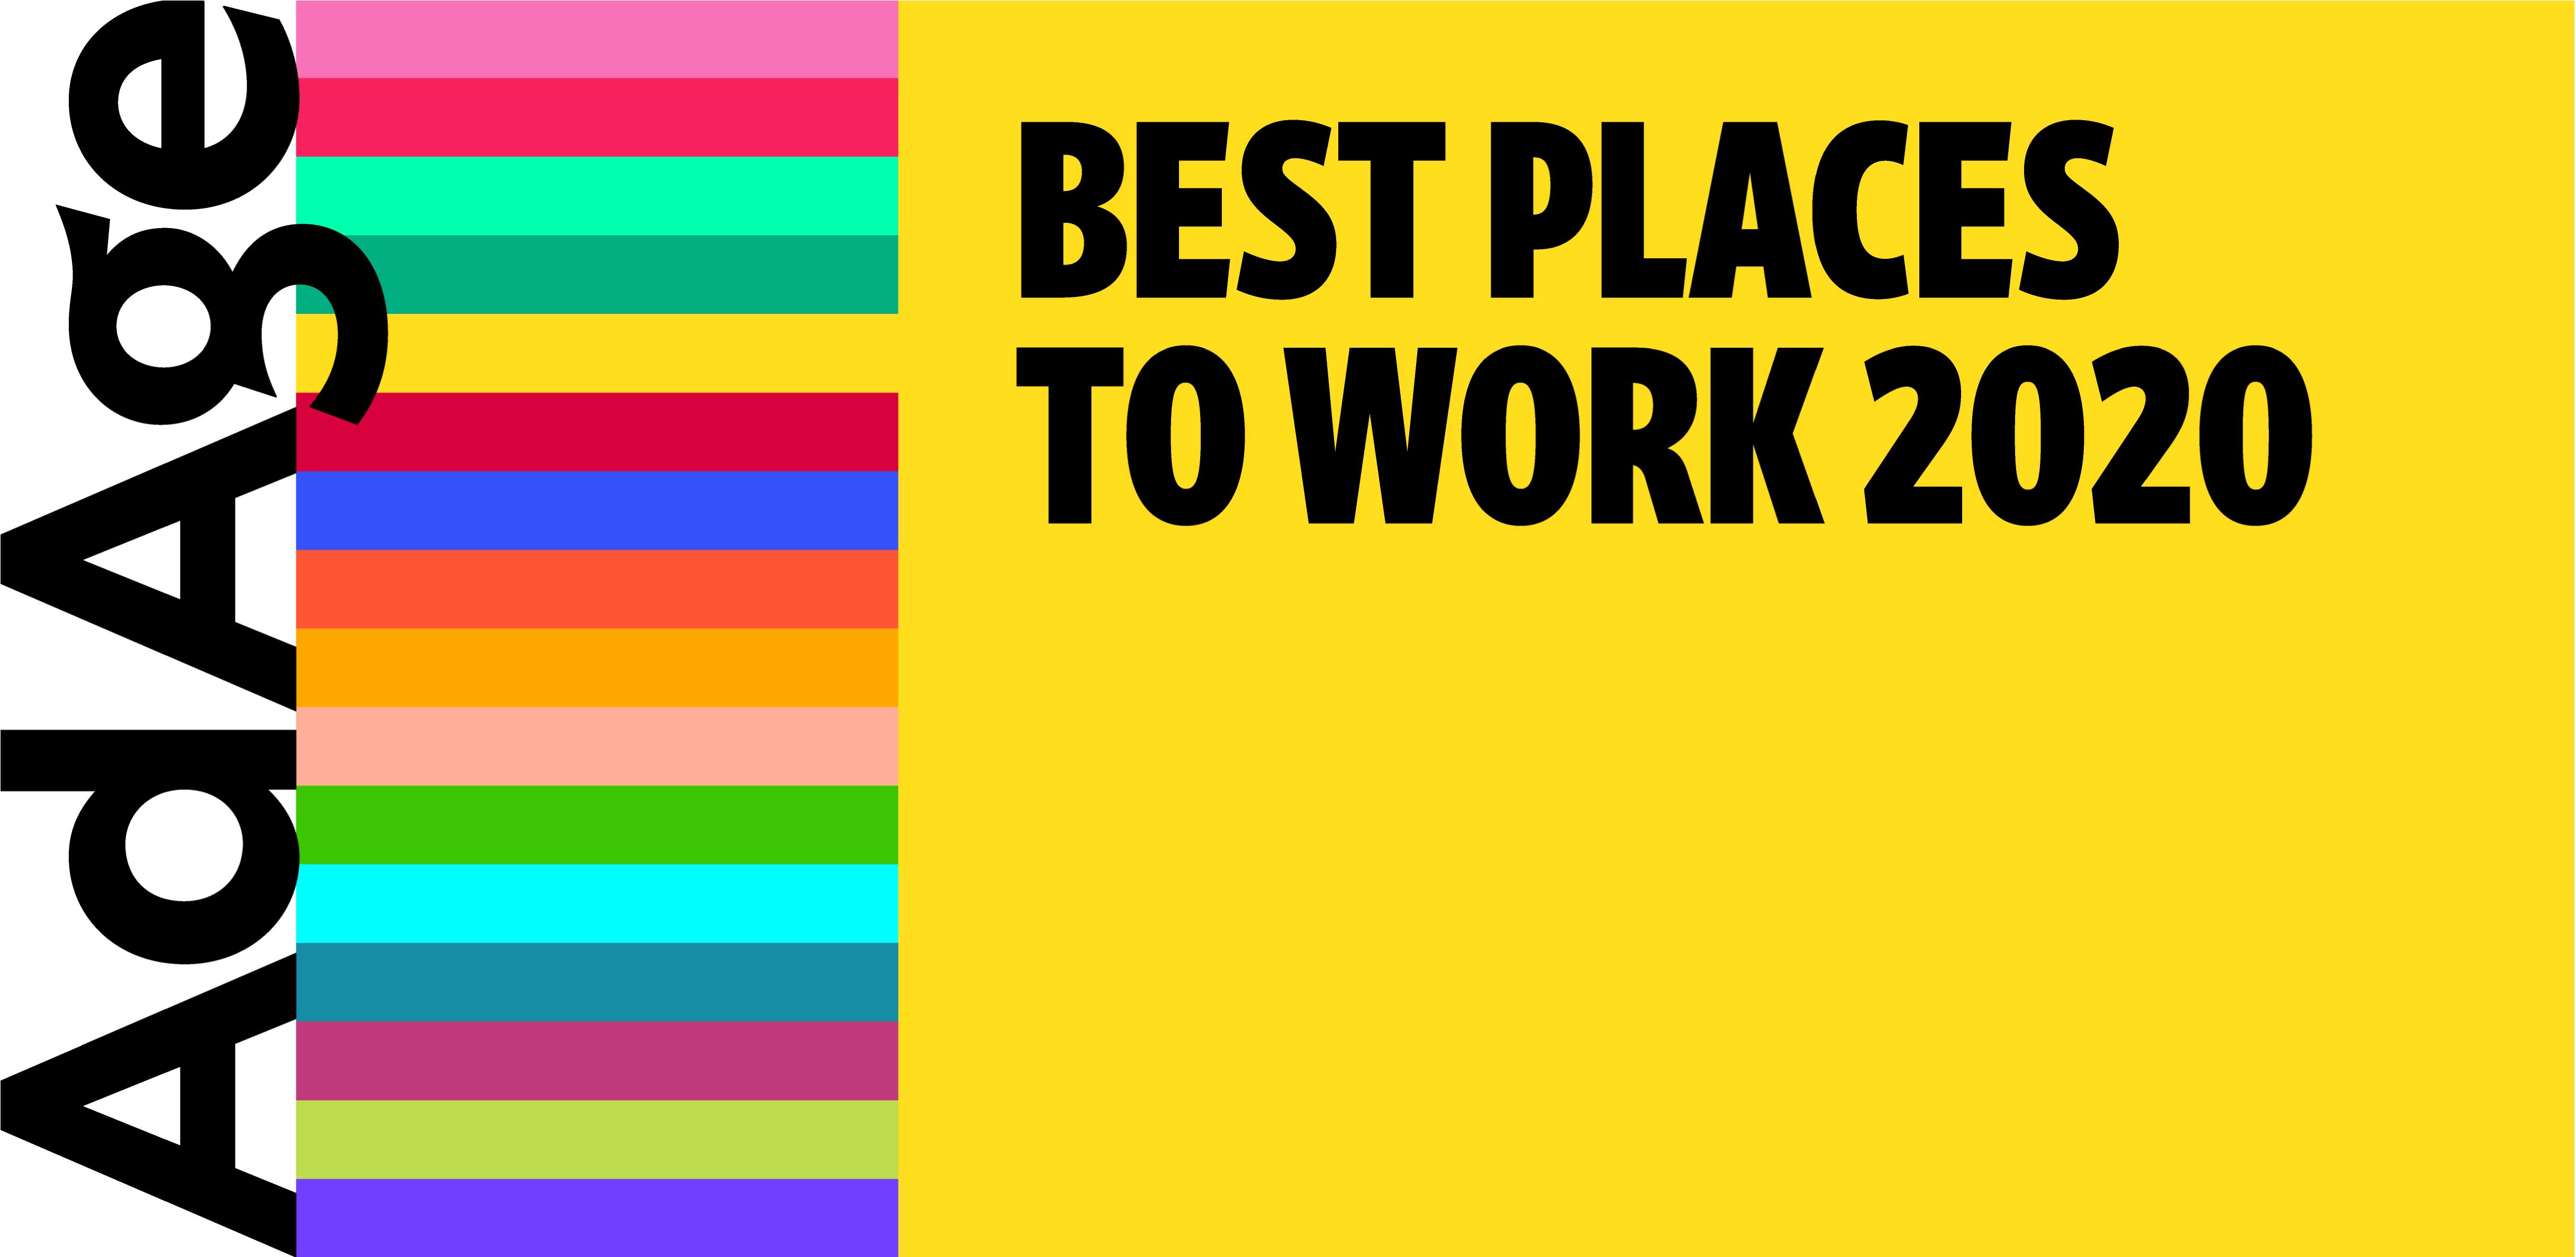 Ad Age Best Places to Work 2020